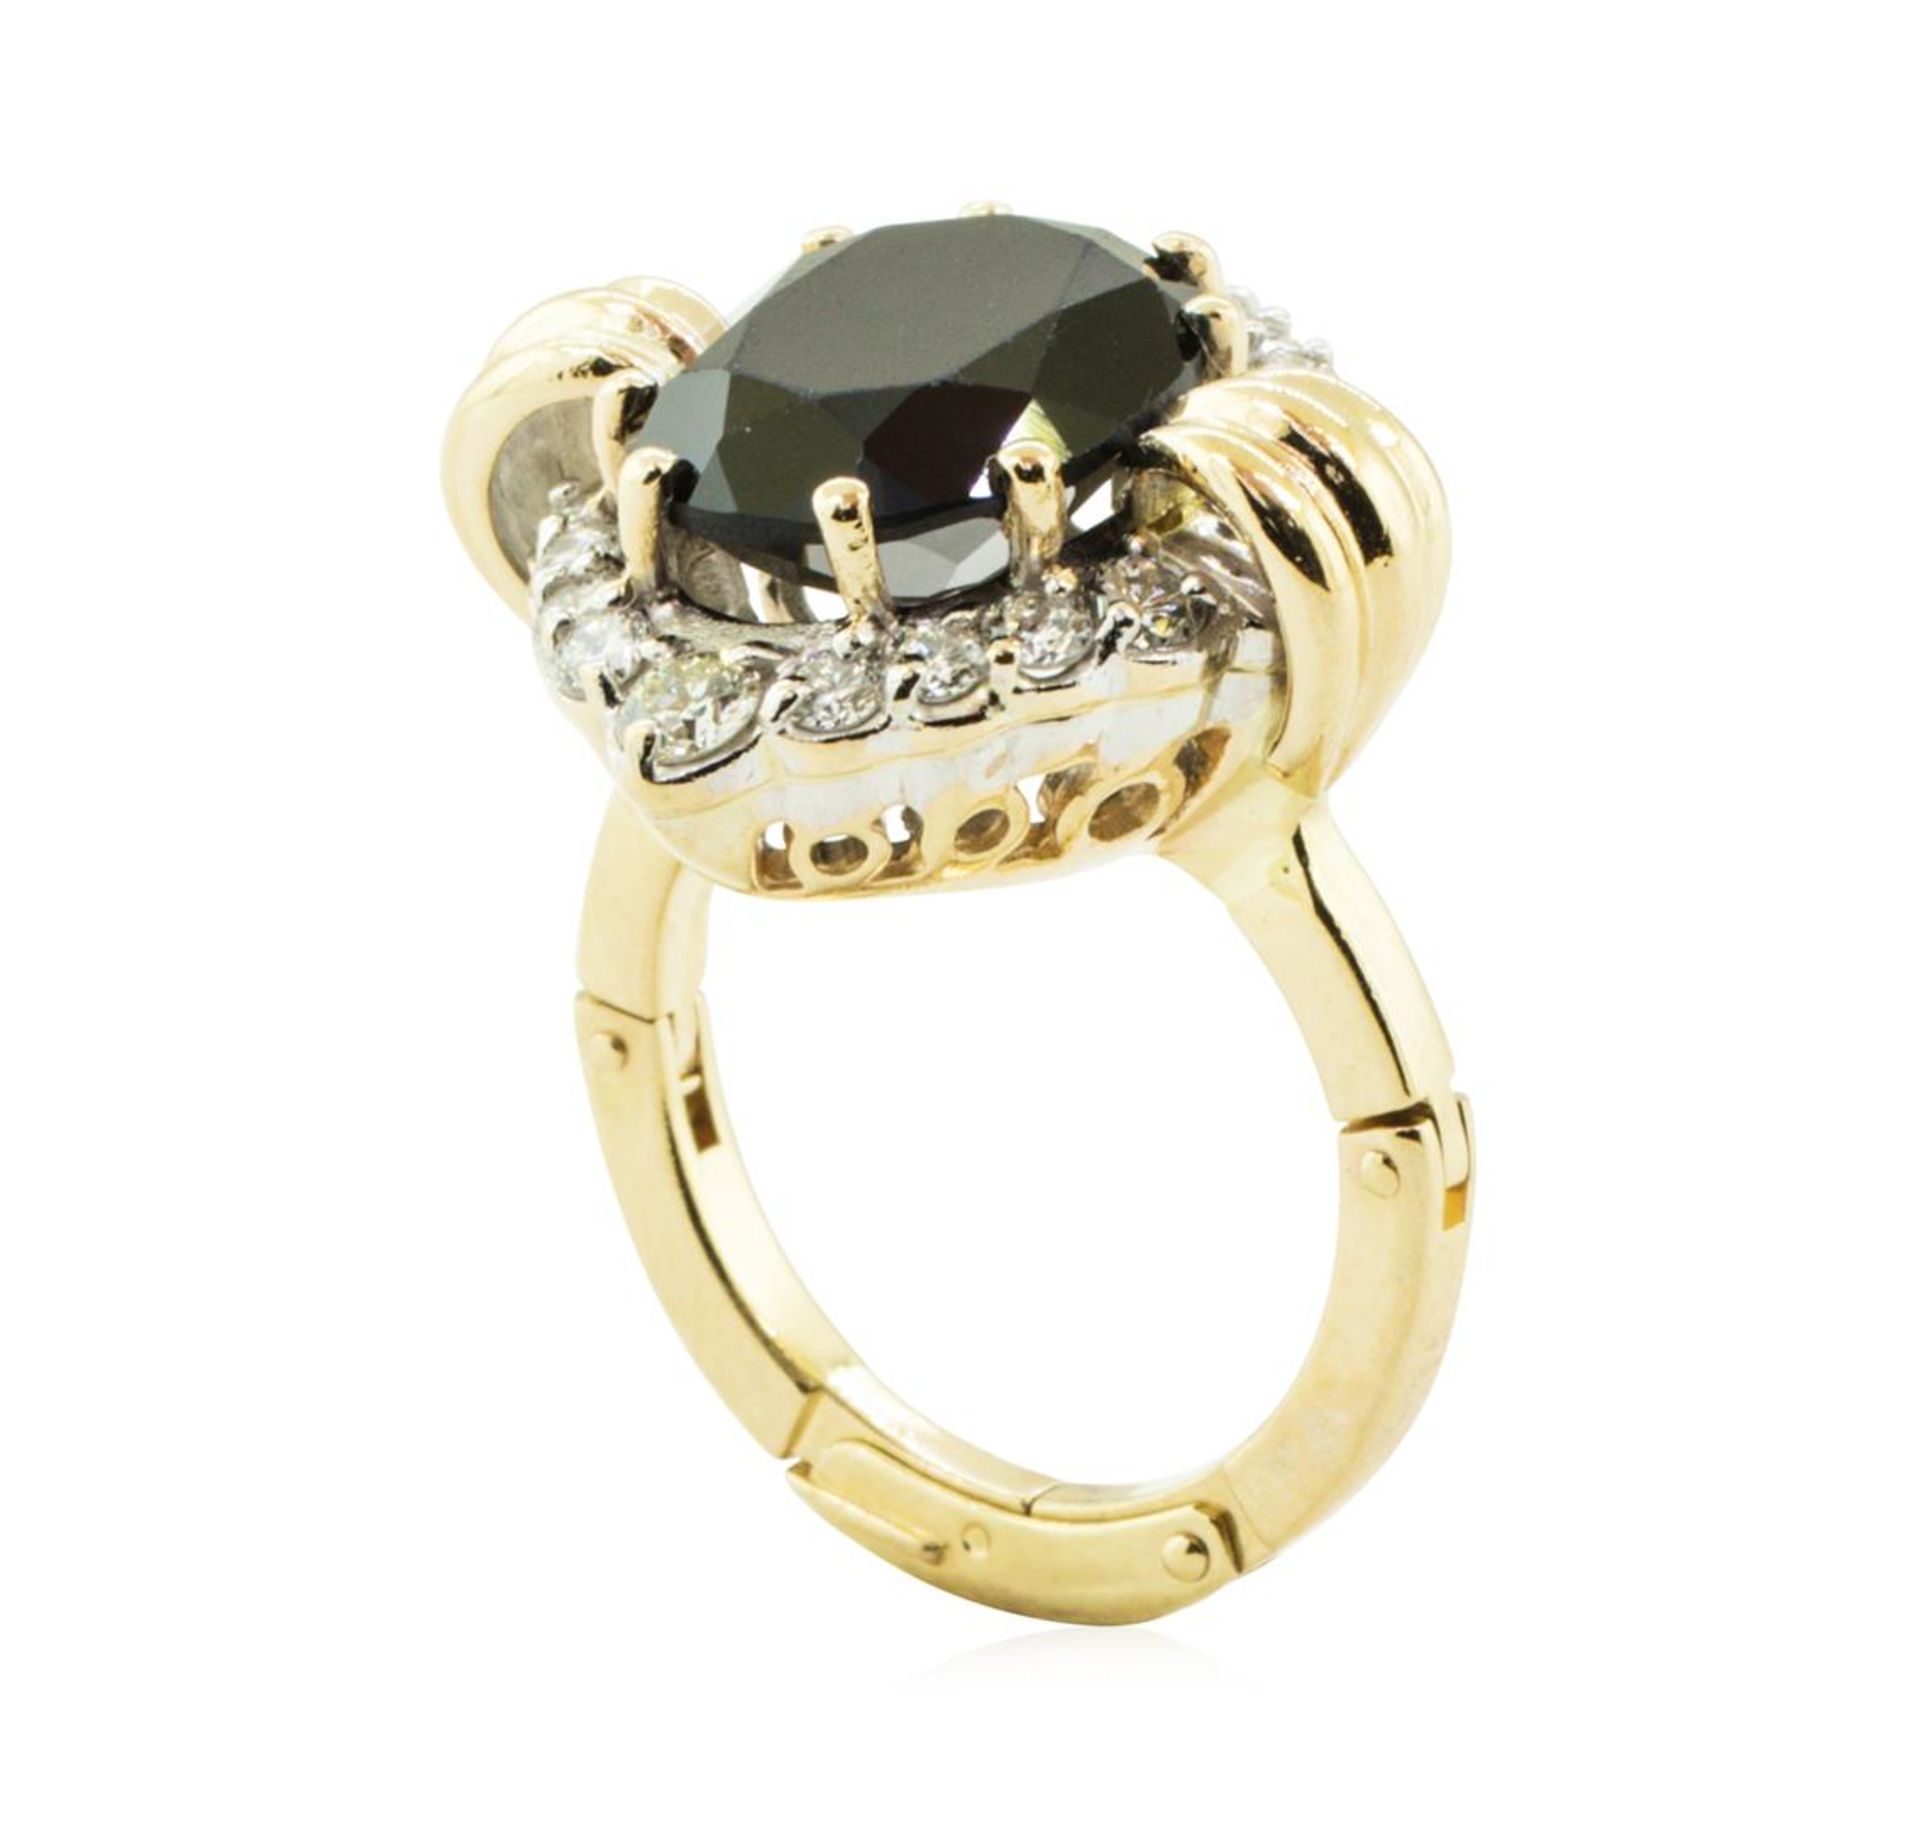 5.75 ctw Oval Brilliant Onyx And Diamond Ring - 14KT Yellow And White Gold - Image 4 of 5